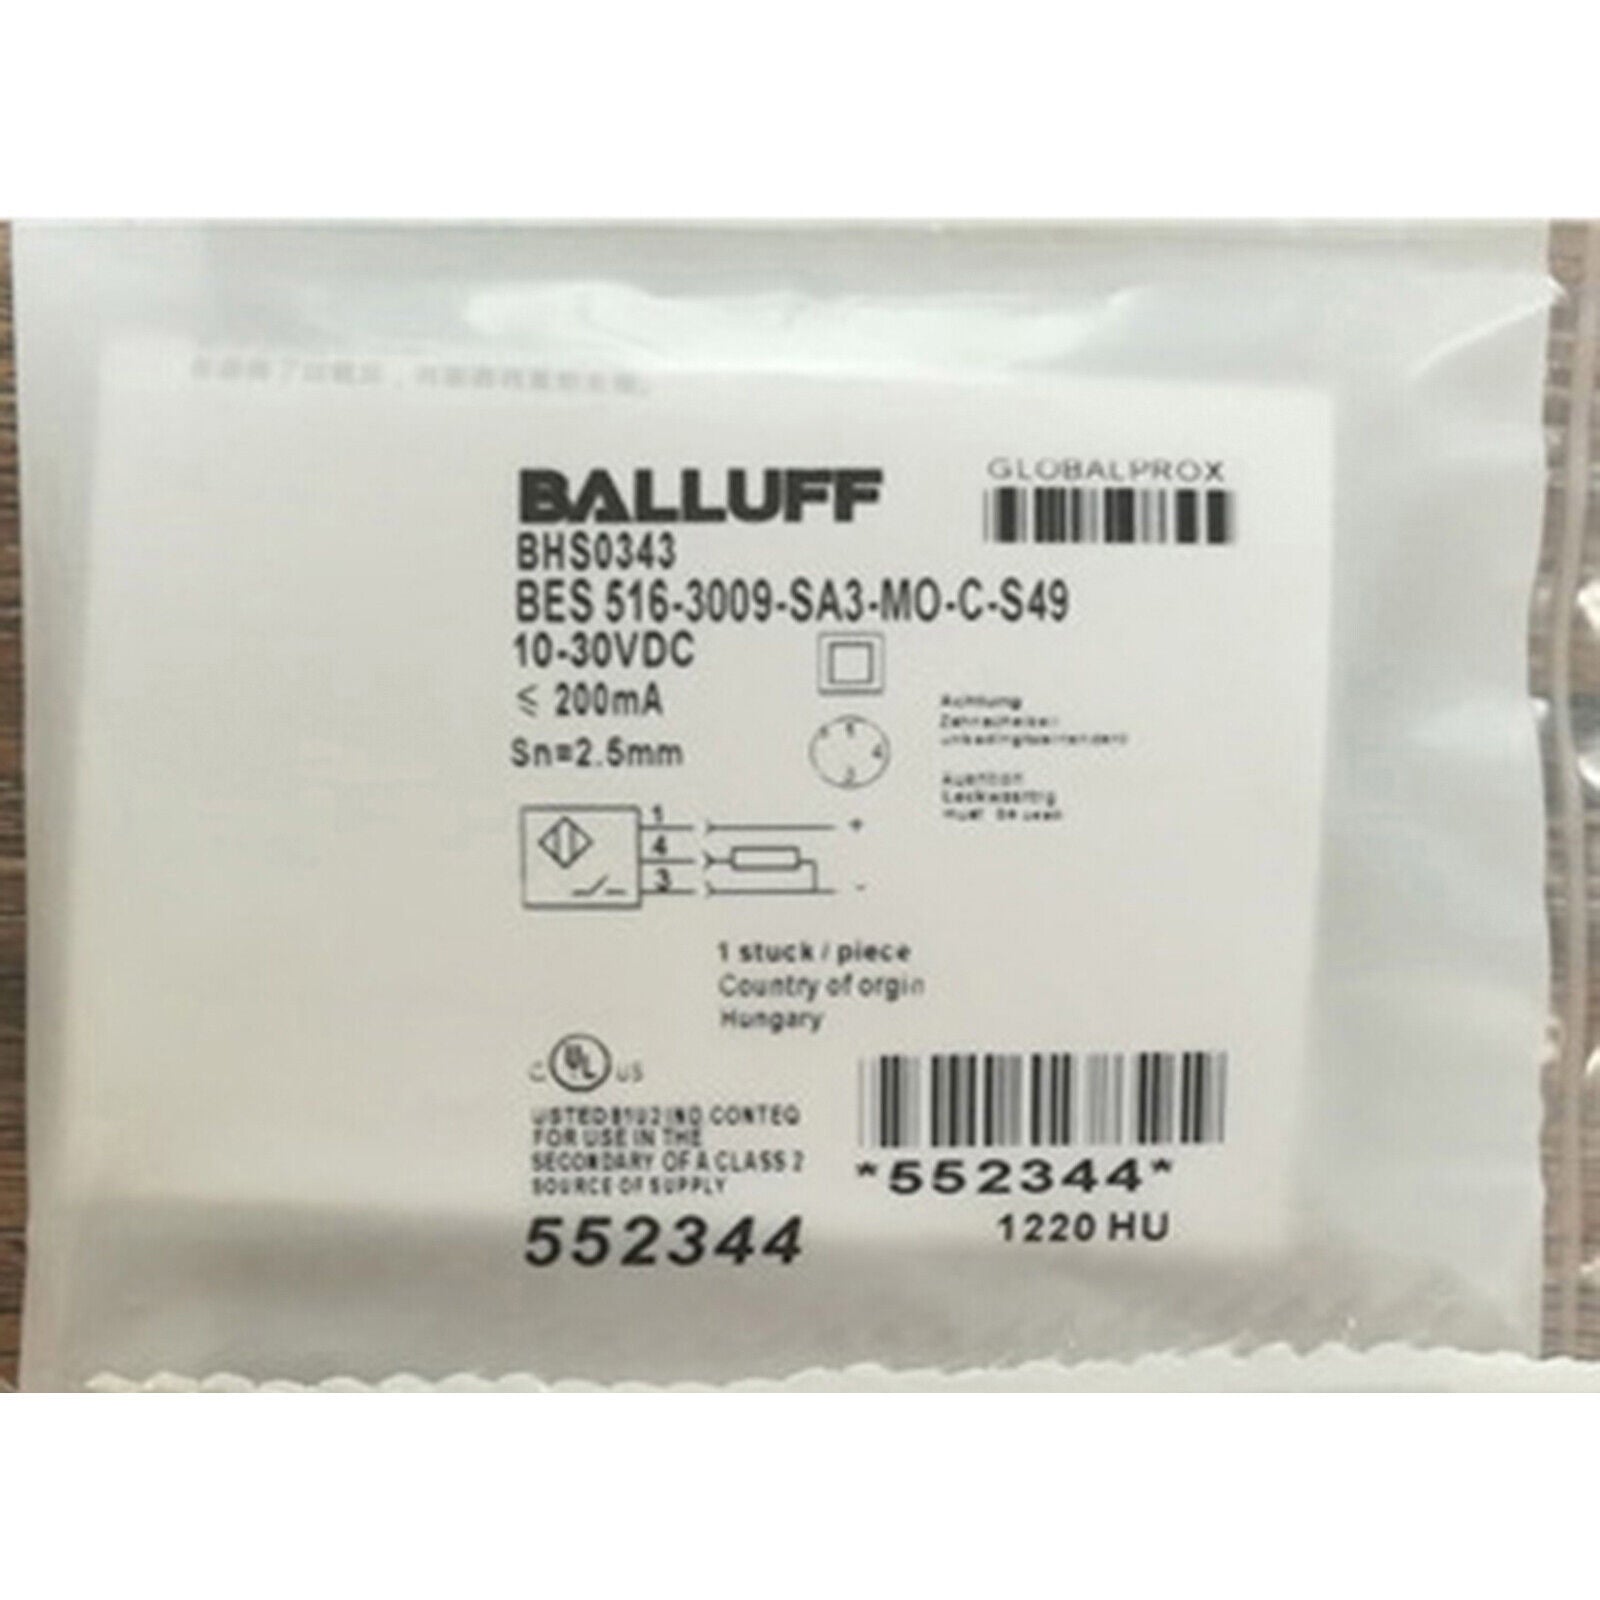 new ONE  for BALLUFF BES 516-3009-SA3-MO-C-S49 Proximity Switch